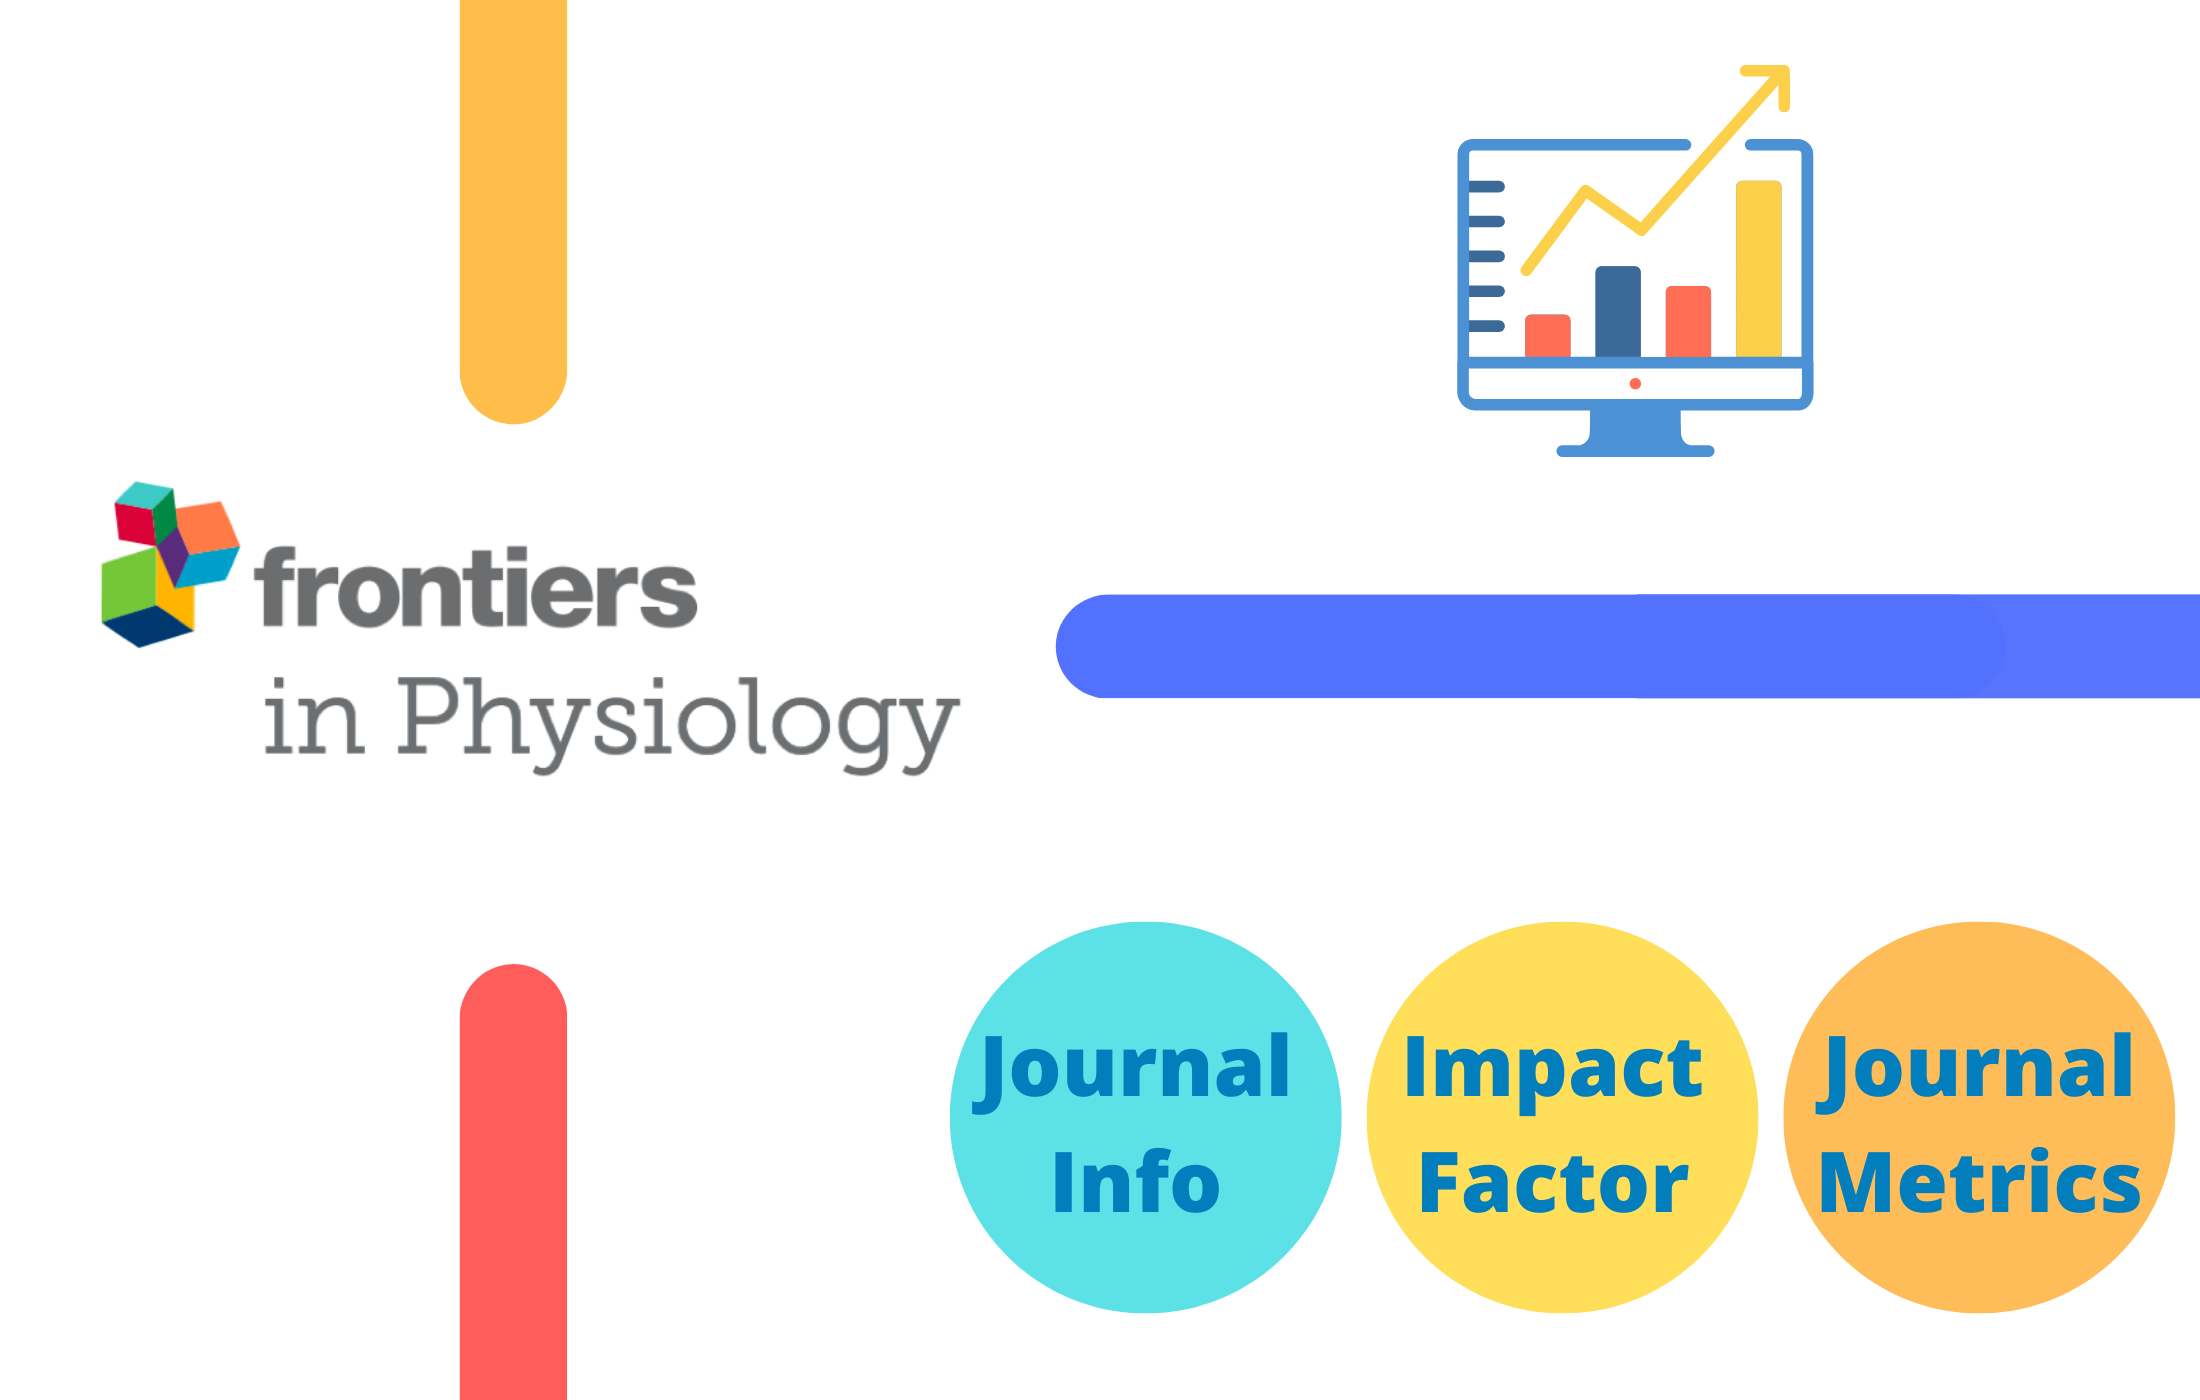 Frontiers in Physiology Impact Factor